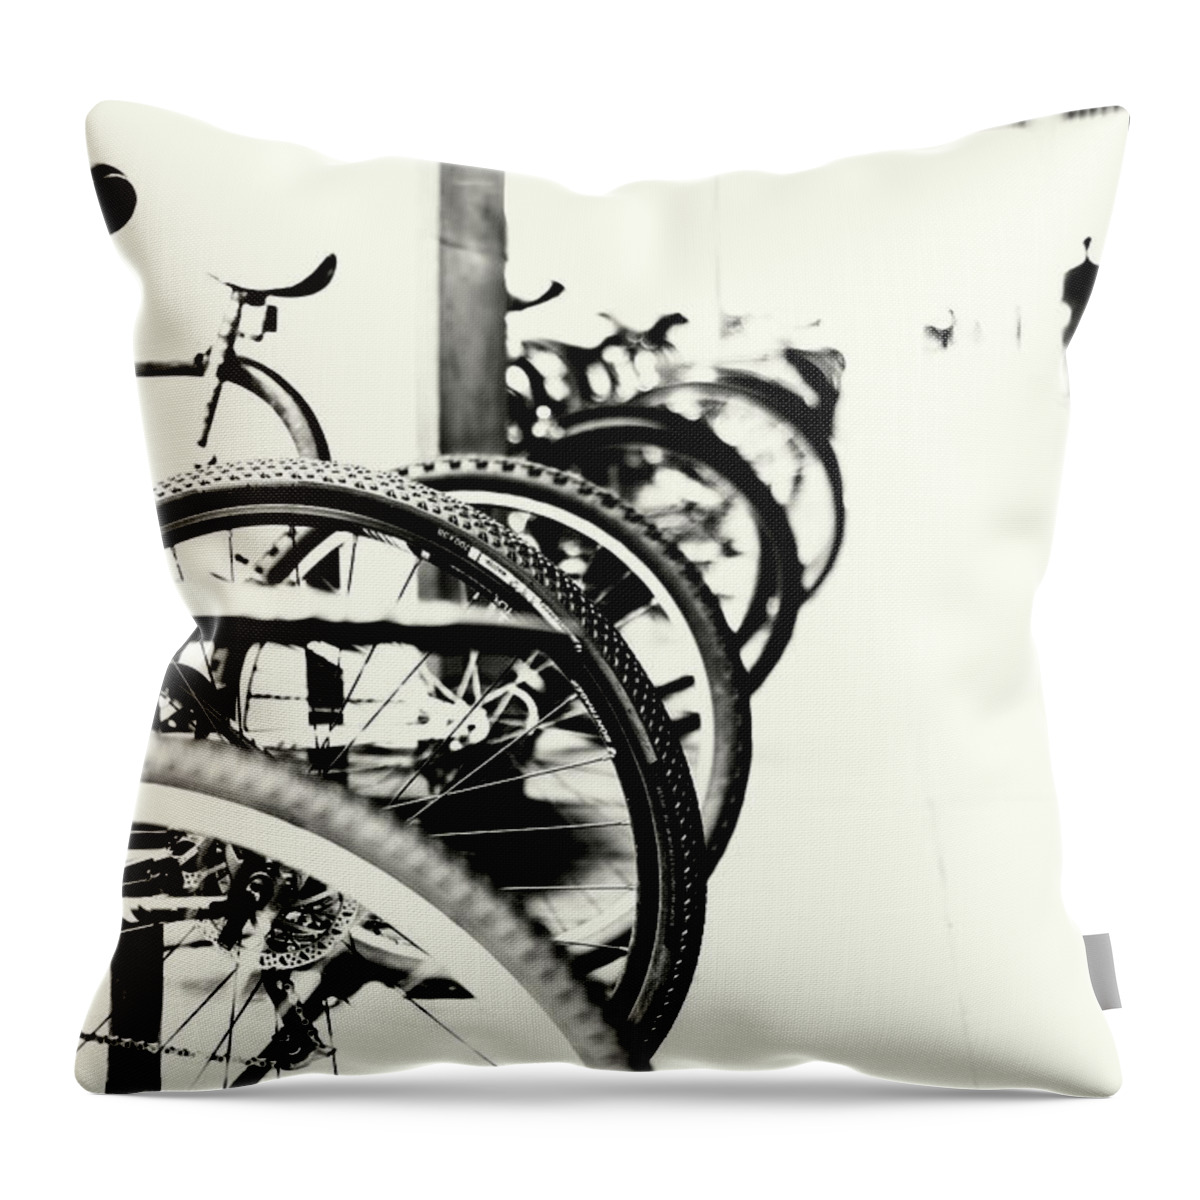 Commuter Bikes Throw Pillow featuring the photograph Passing Cycles by John Williams